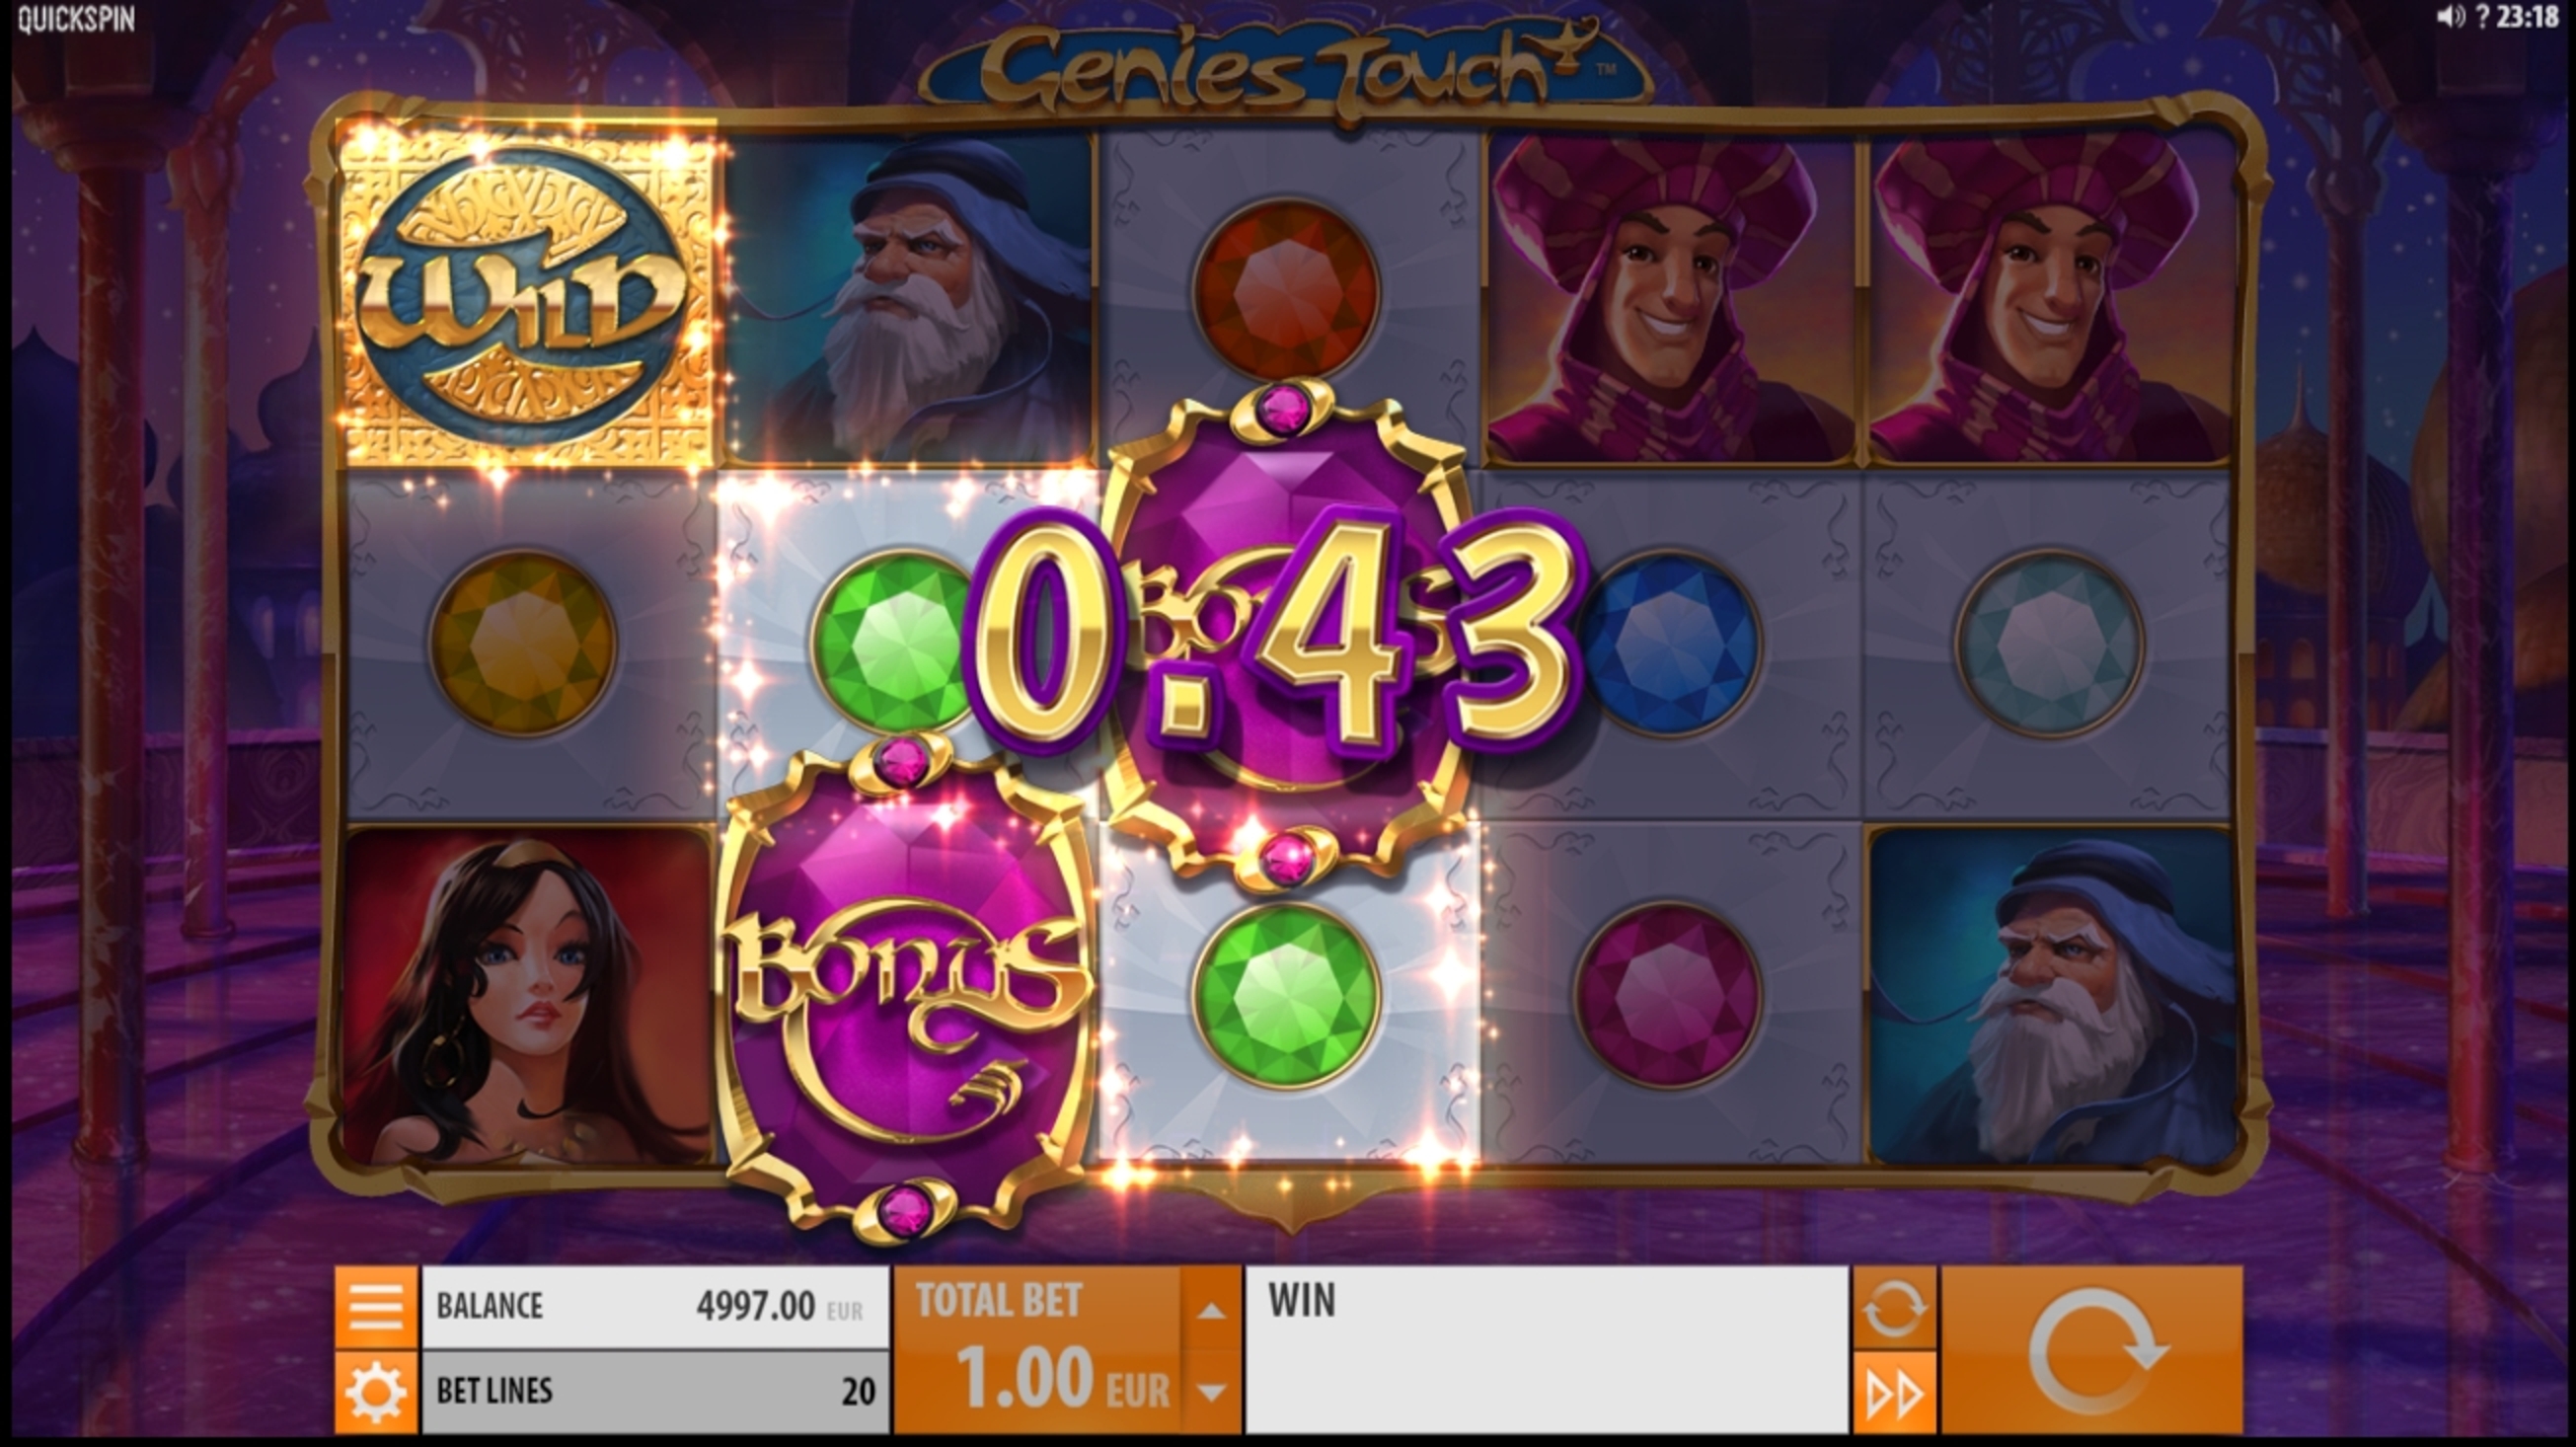 Win Money in Genies Touch Free Slot Game by Quickspin